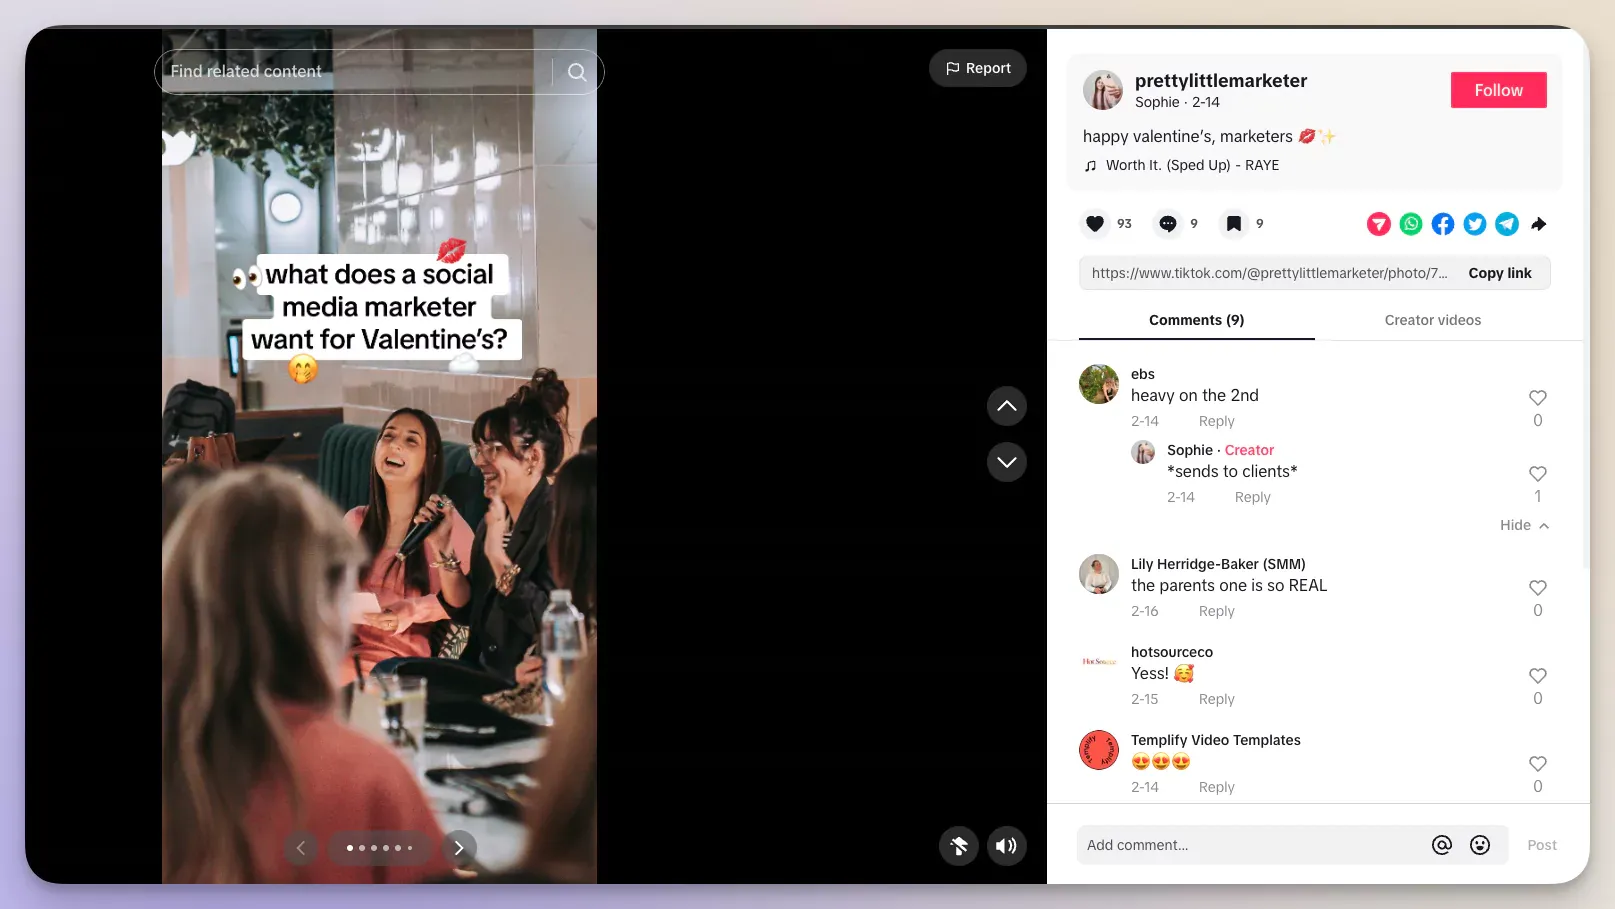 Q&A session as a TikTok post from Pretty Little Marketer